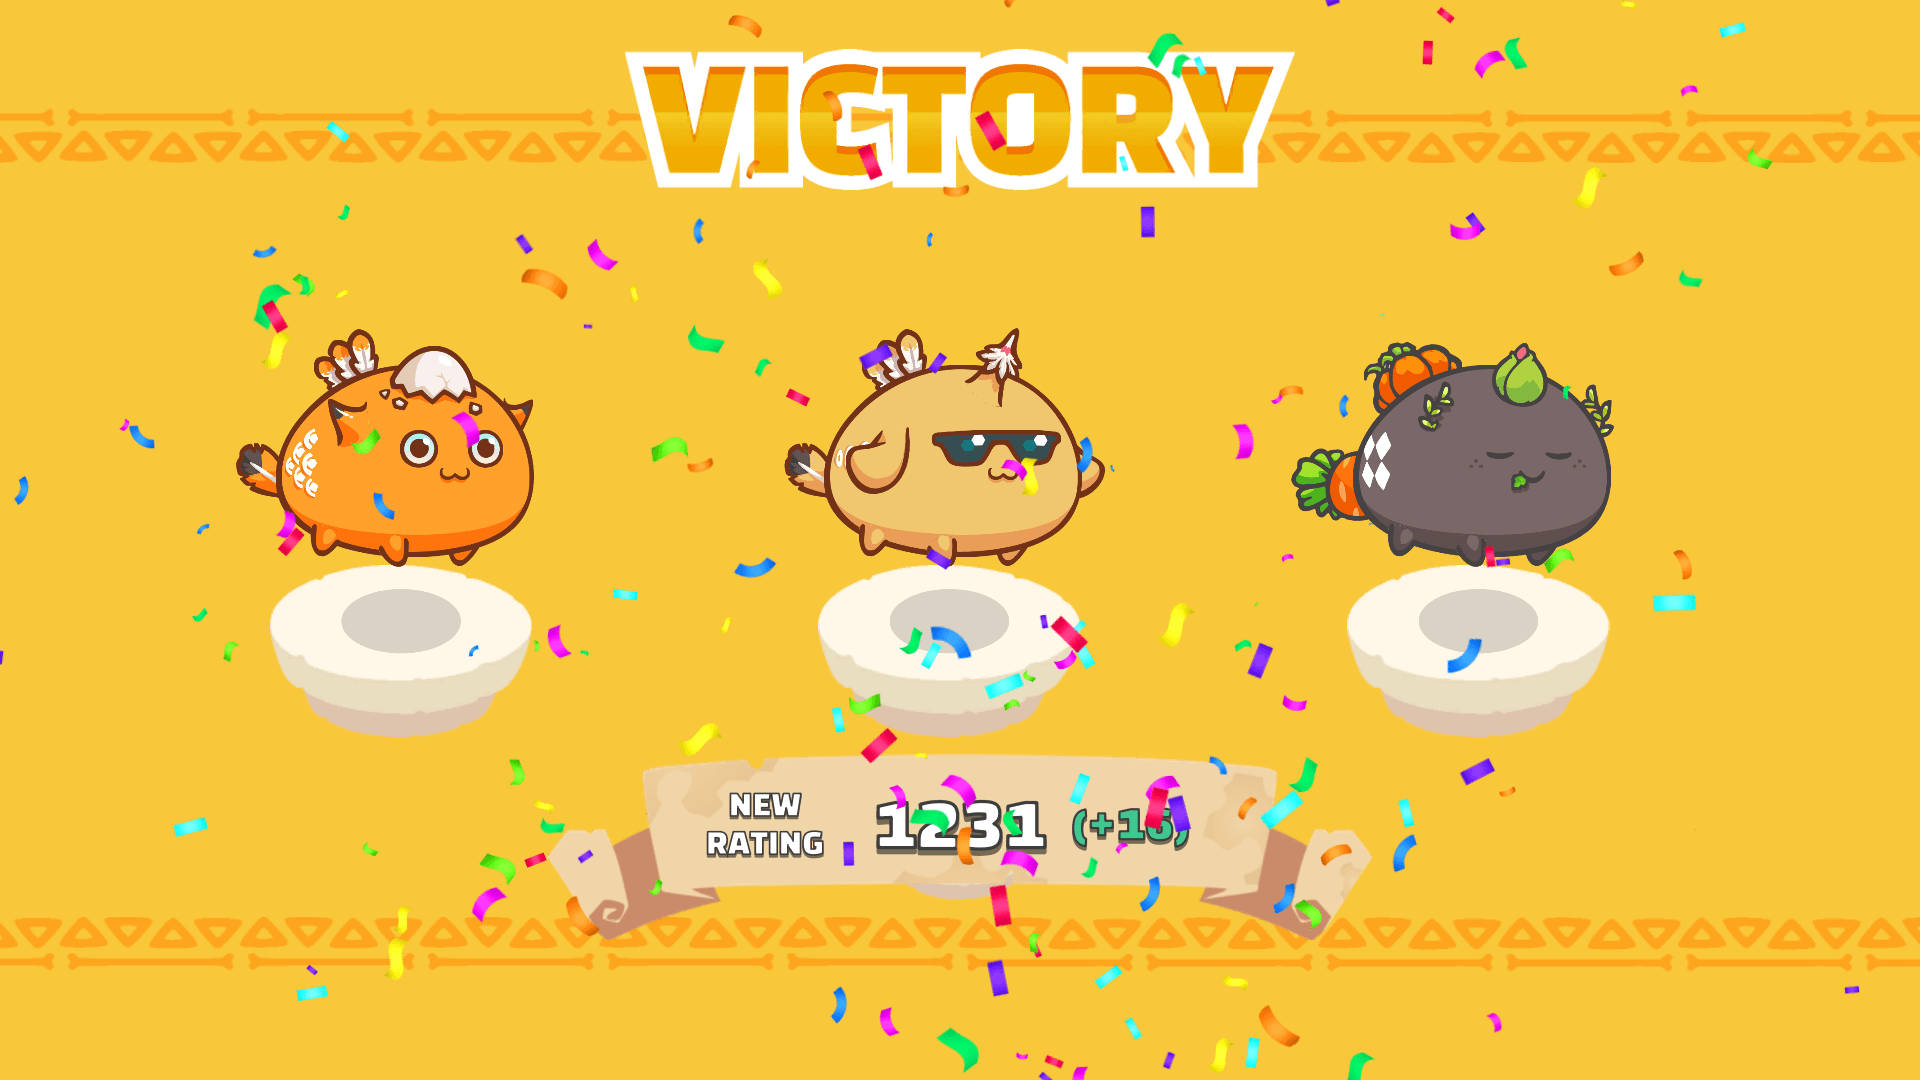 Axie Infinity Victory User Interface Background